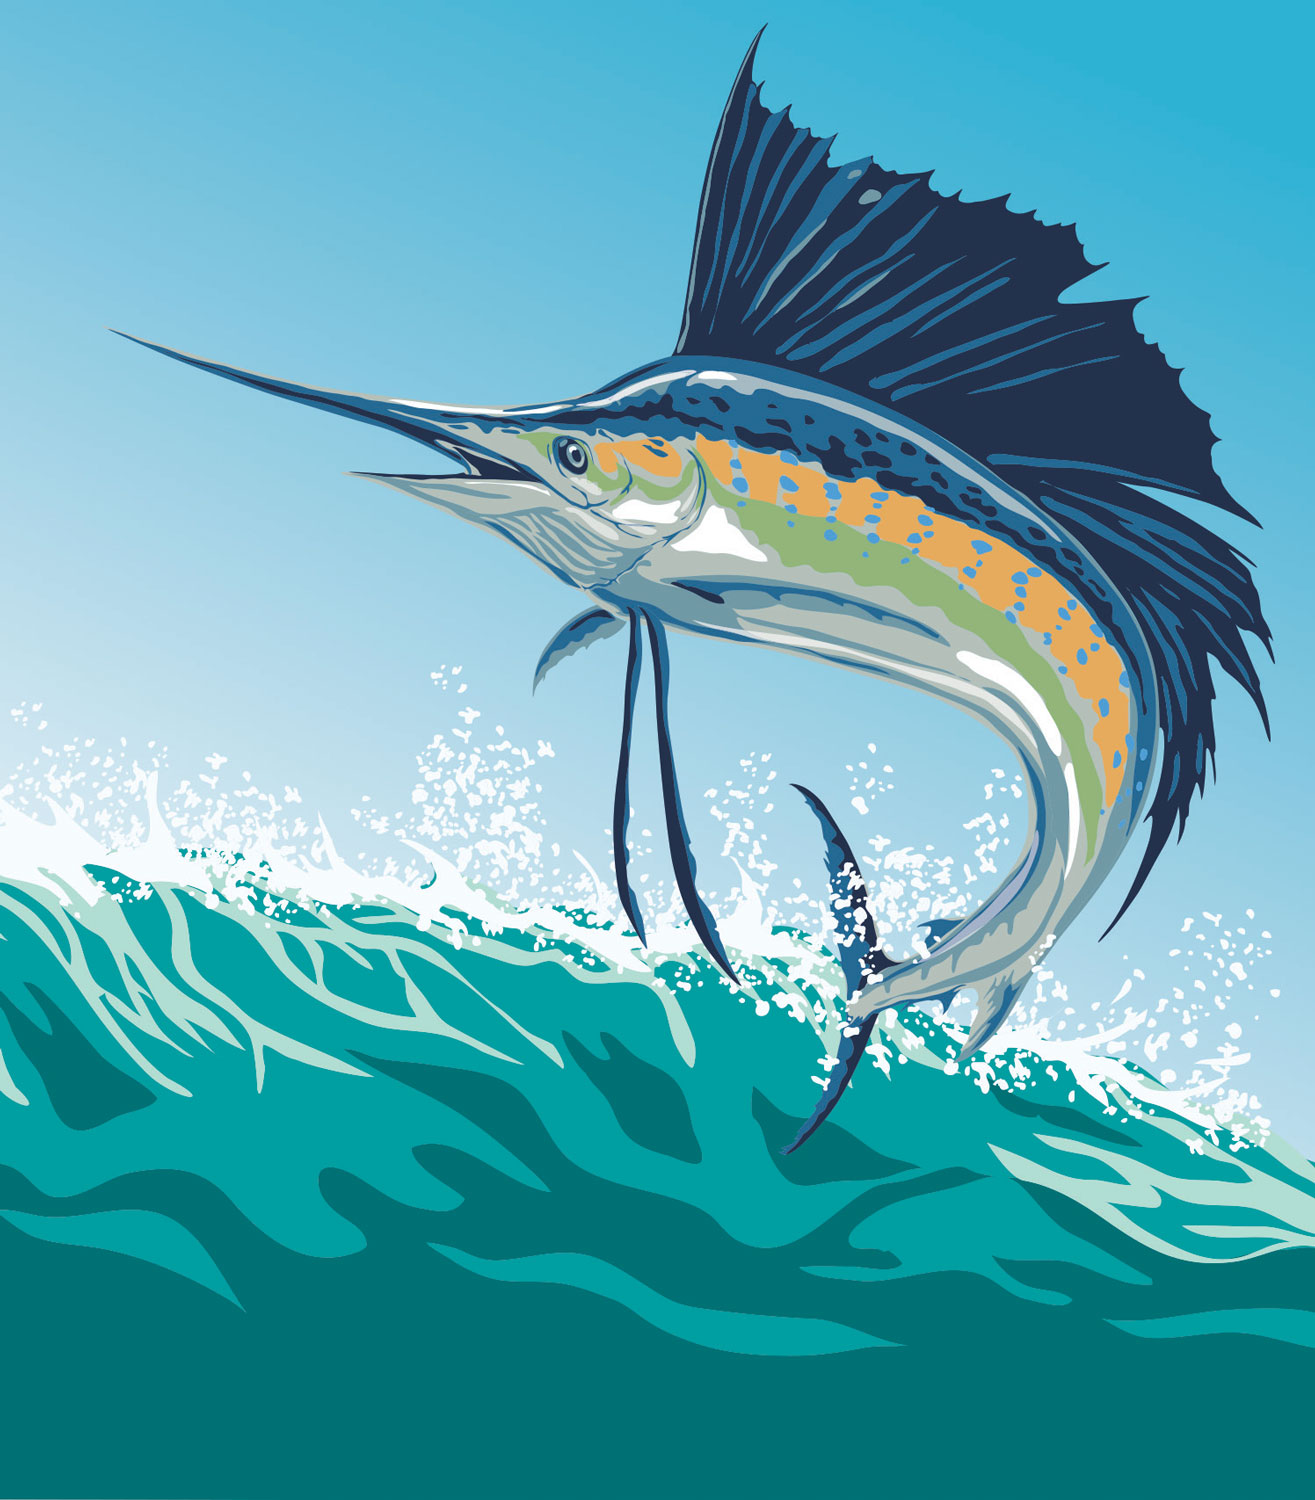 Sailfish jumping out of the water illustration